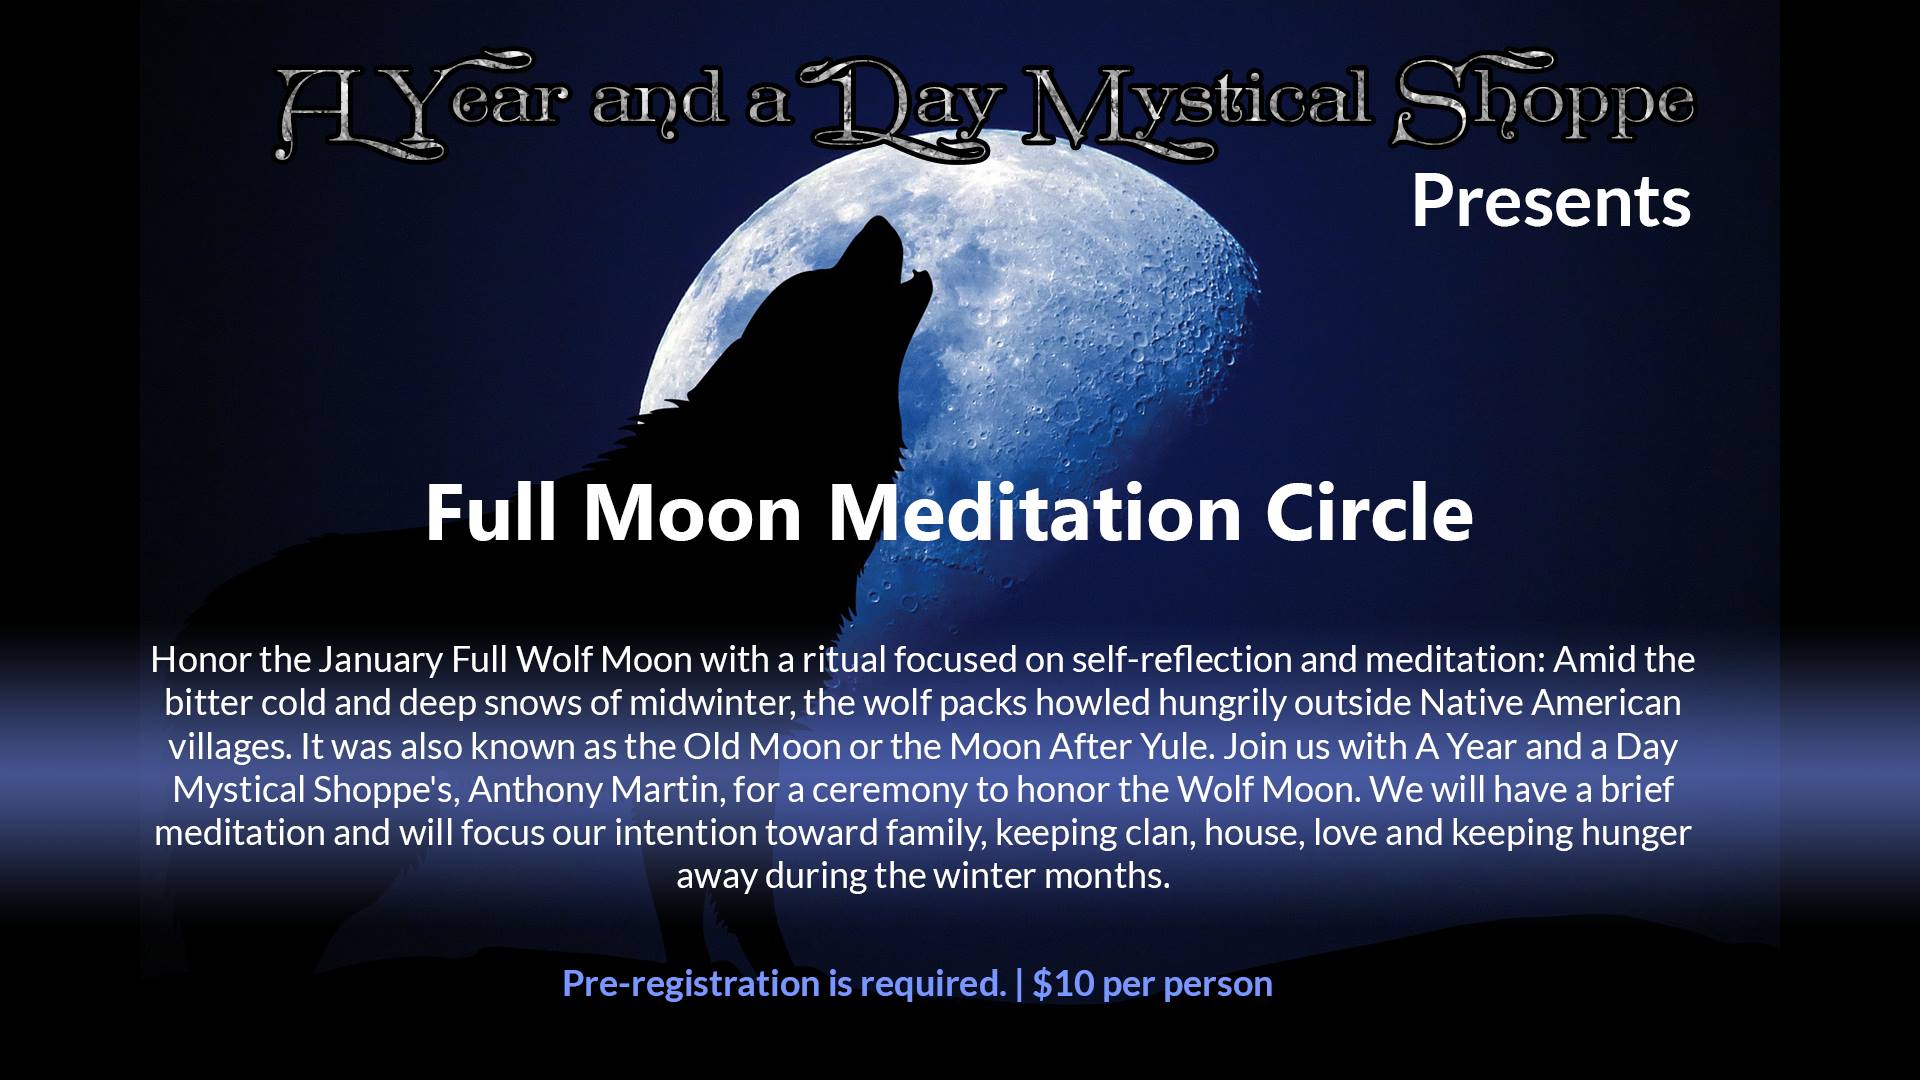 January Full Wolf Moon Meditation Circle A Year and a Day Mystical Shoppe